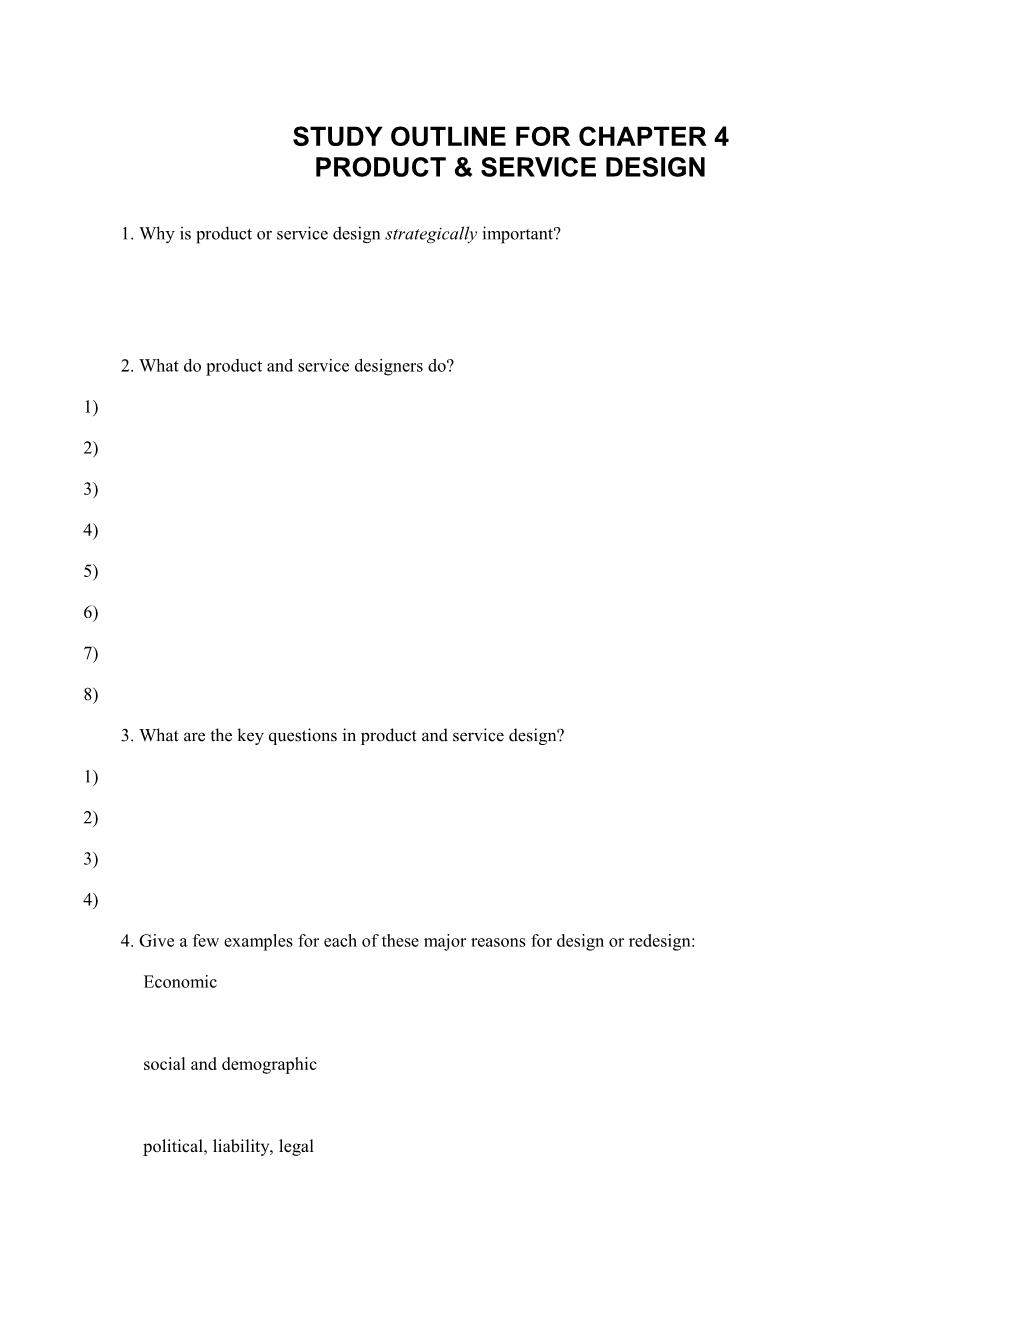 Study Outline for Chapter 4 Product & Service Design